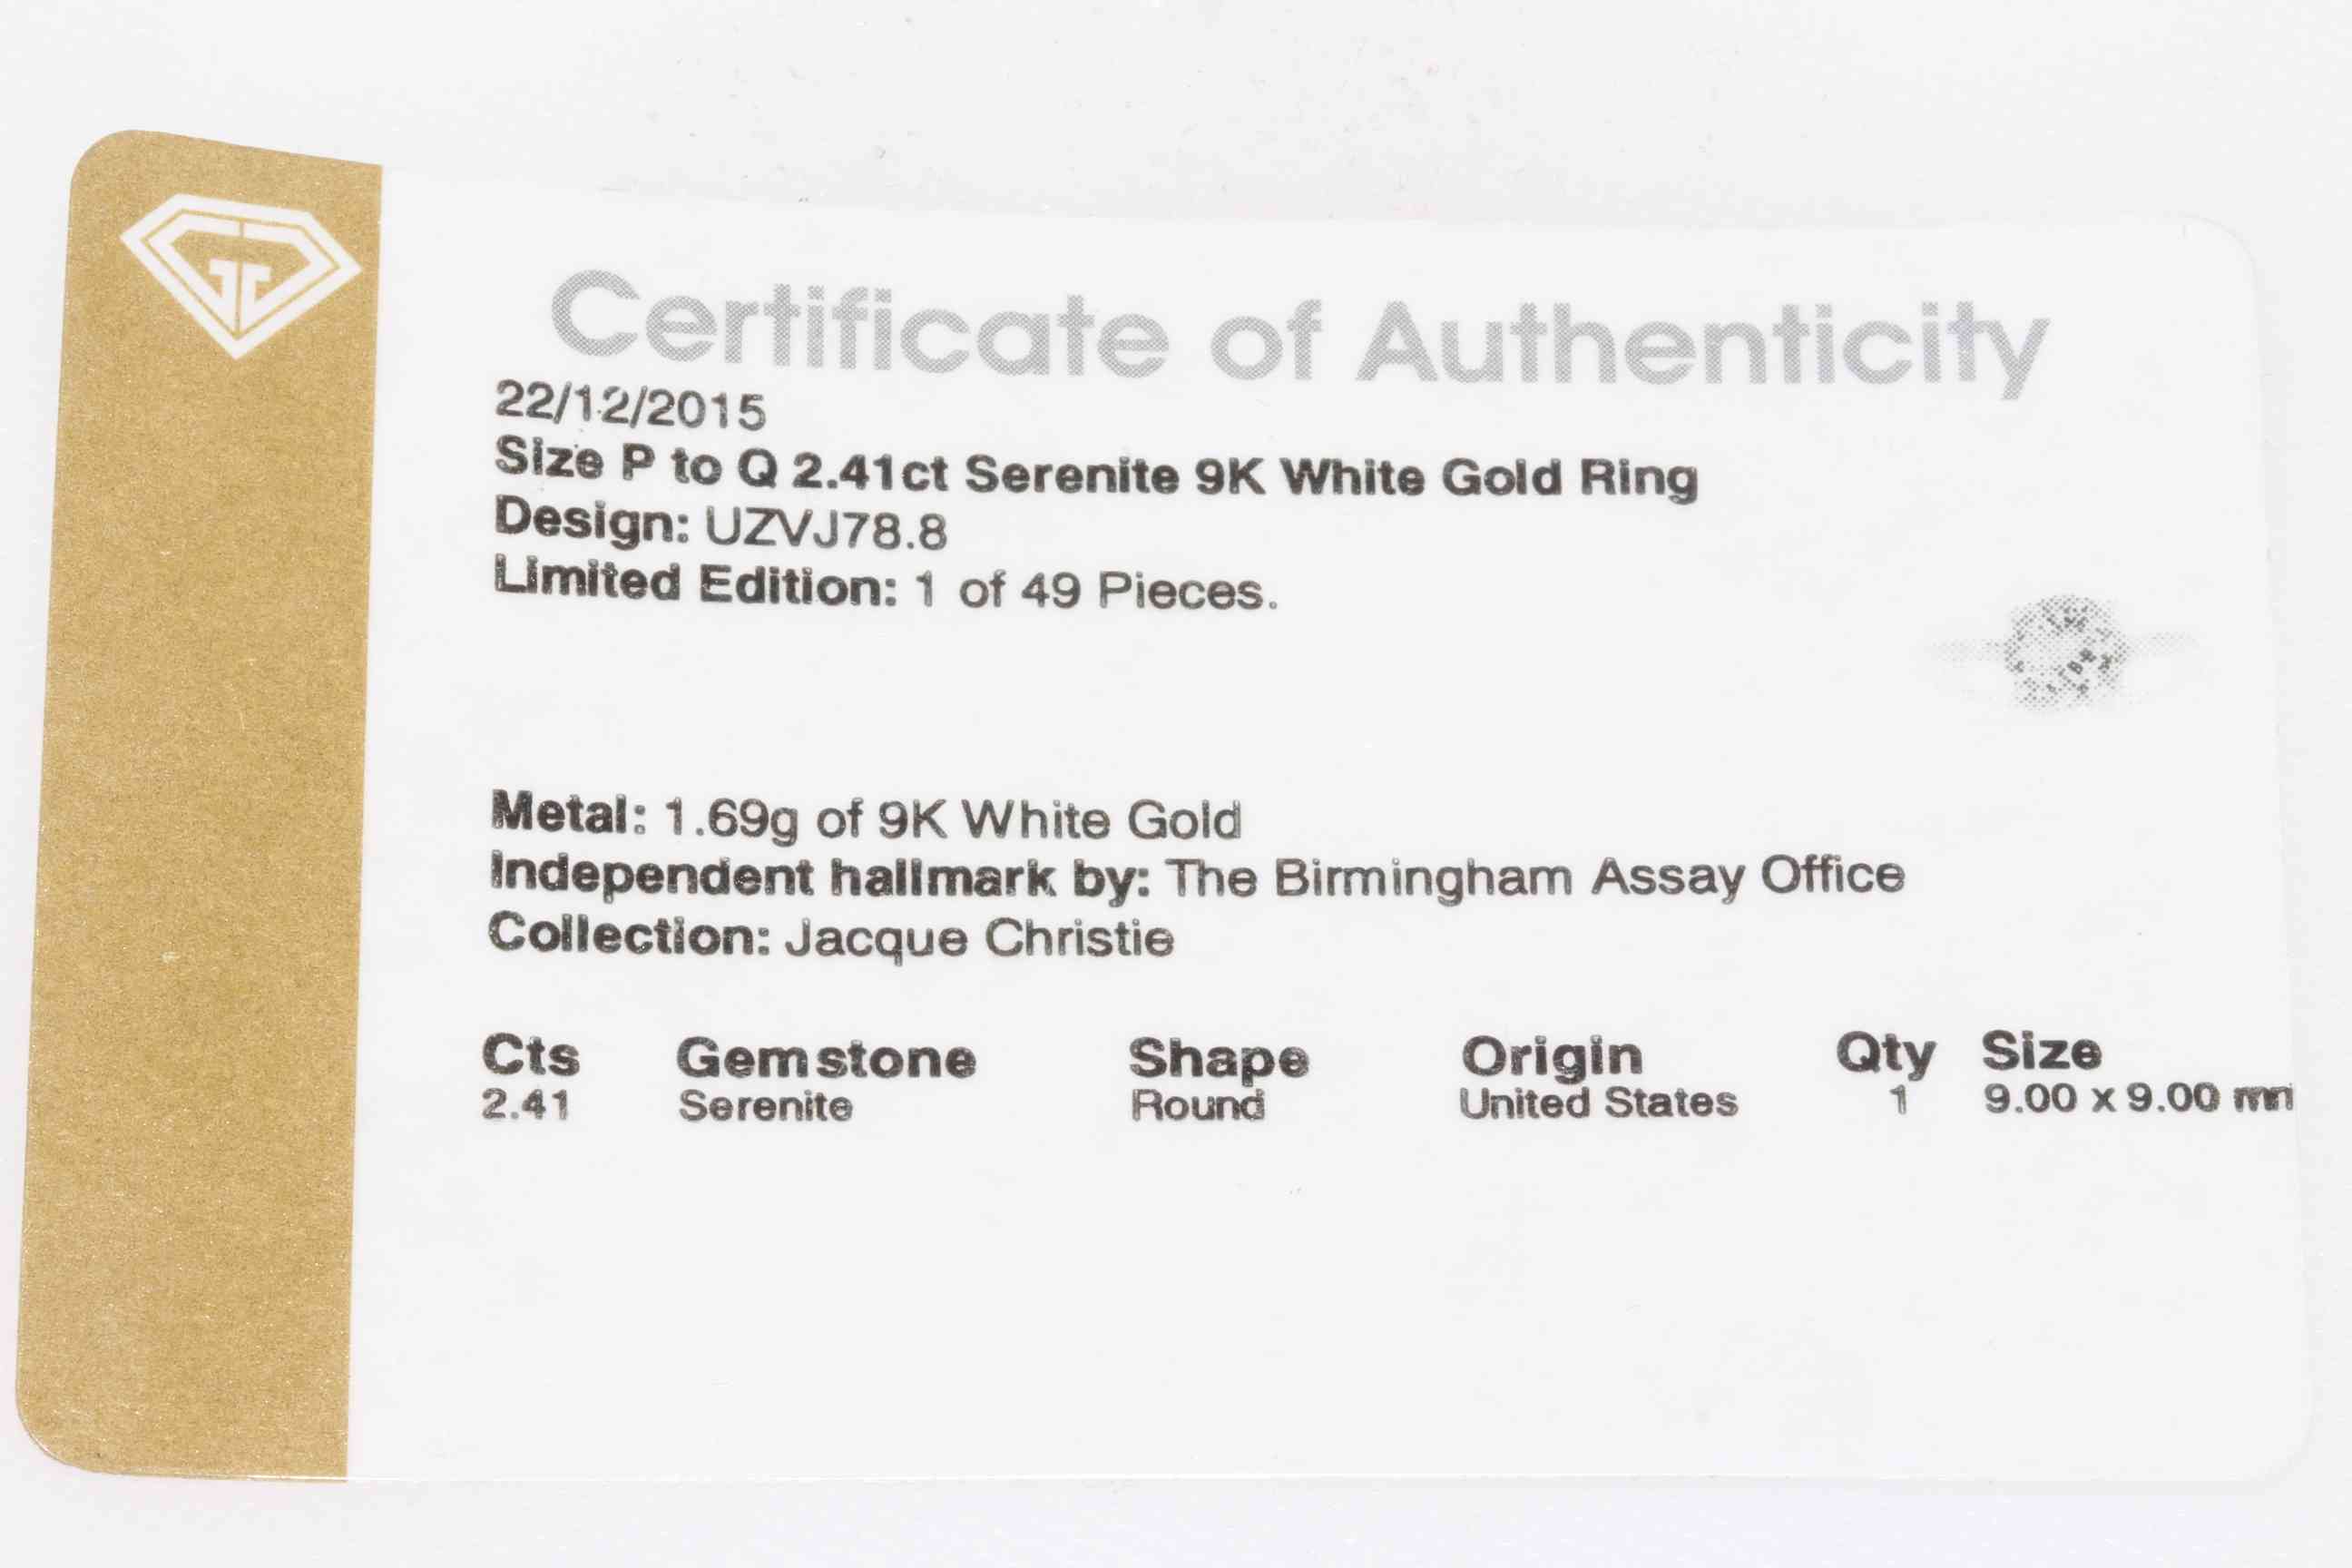 9k white gold and Serenite ring, size P/Q, with certificate. - Image 2 of 2